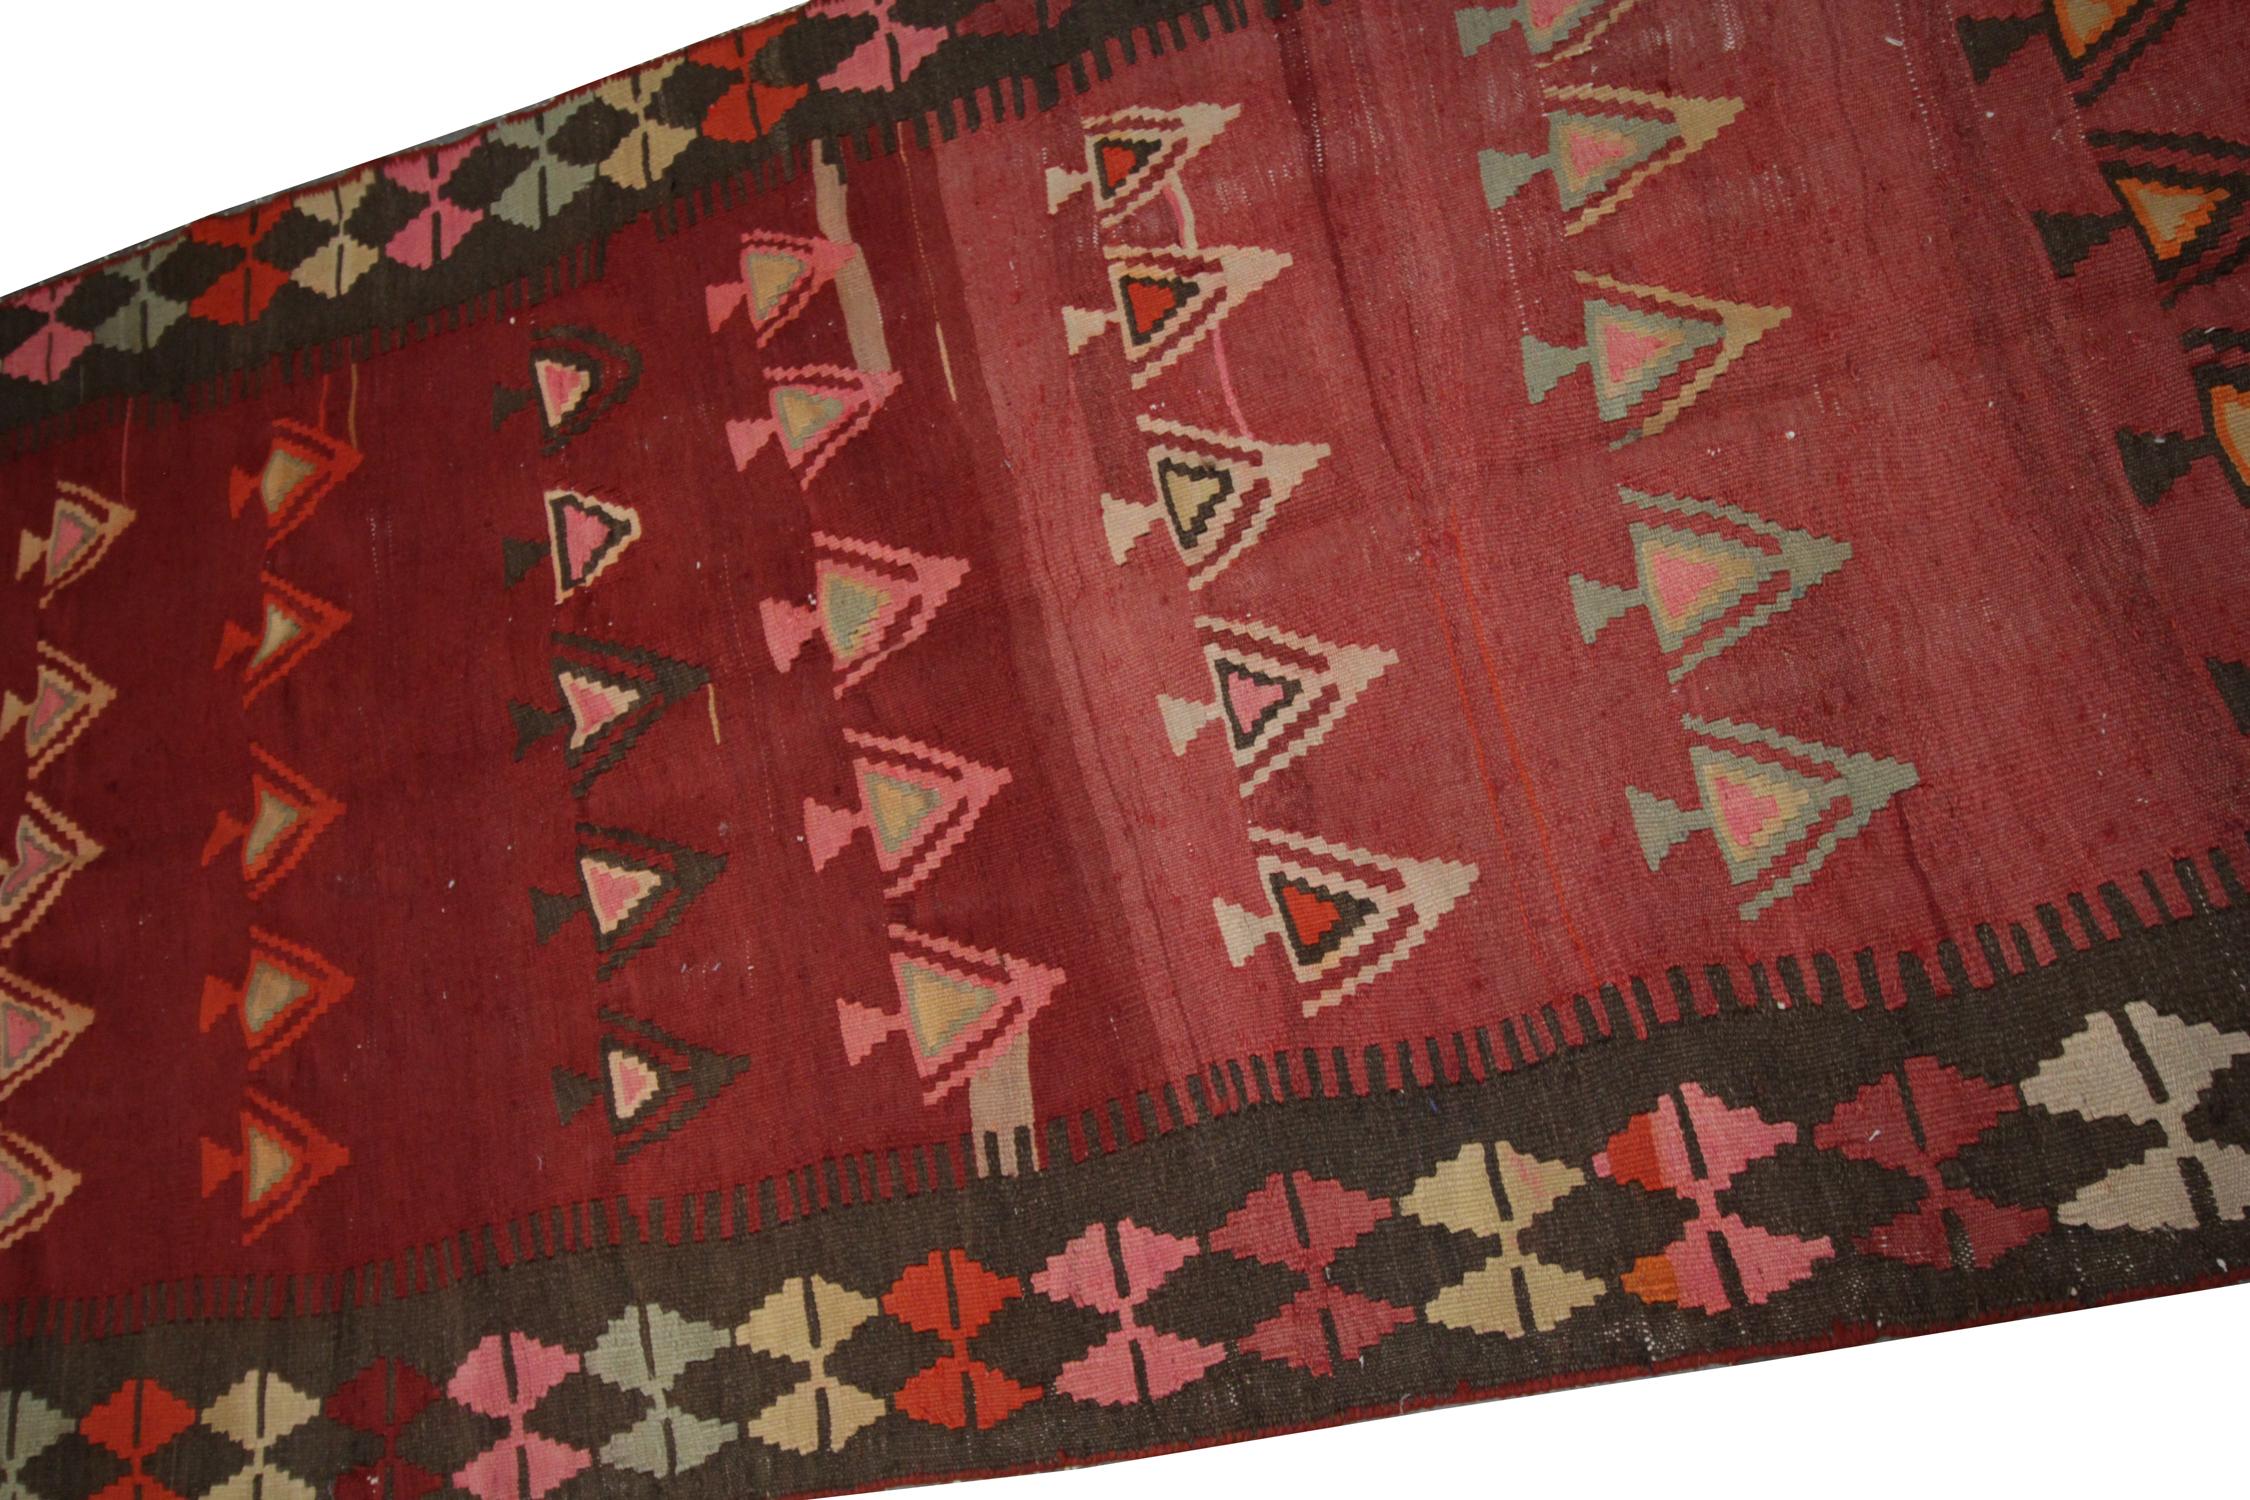 This fine wool handmade kilim was constructed in Azerbaijan in the 1960s/70s. The design features a rich red background with a bold repeating pattern in green, yellow, and blue accents. The central structure has been framed with a repeating pattern